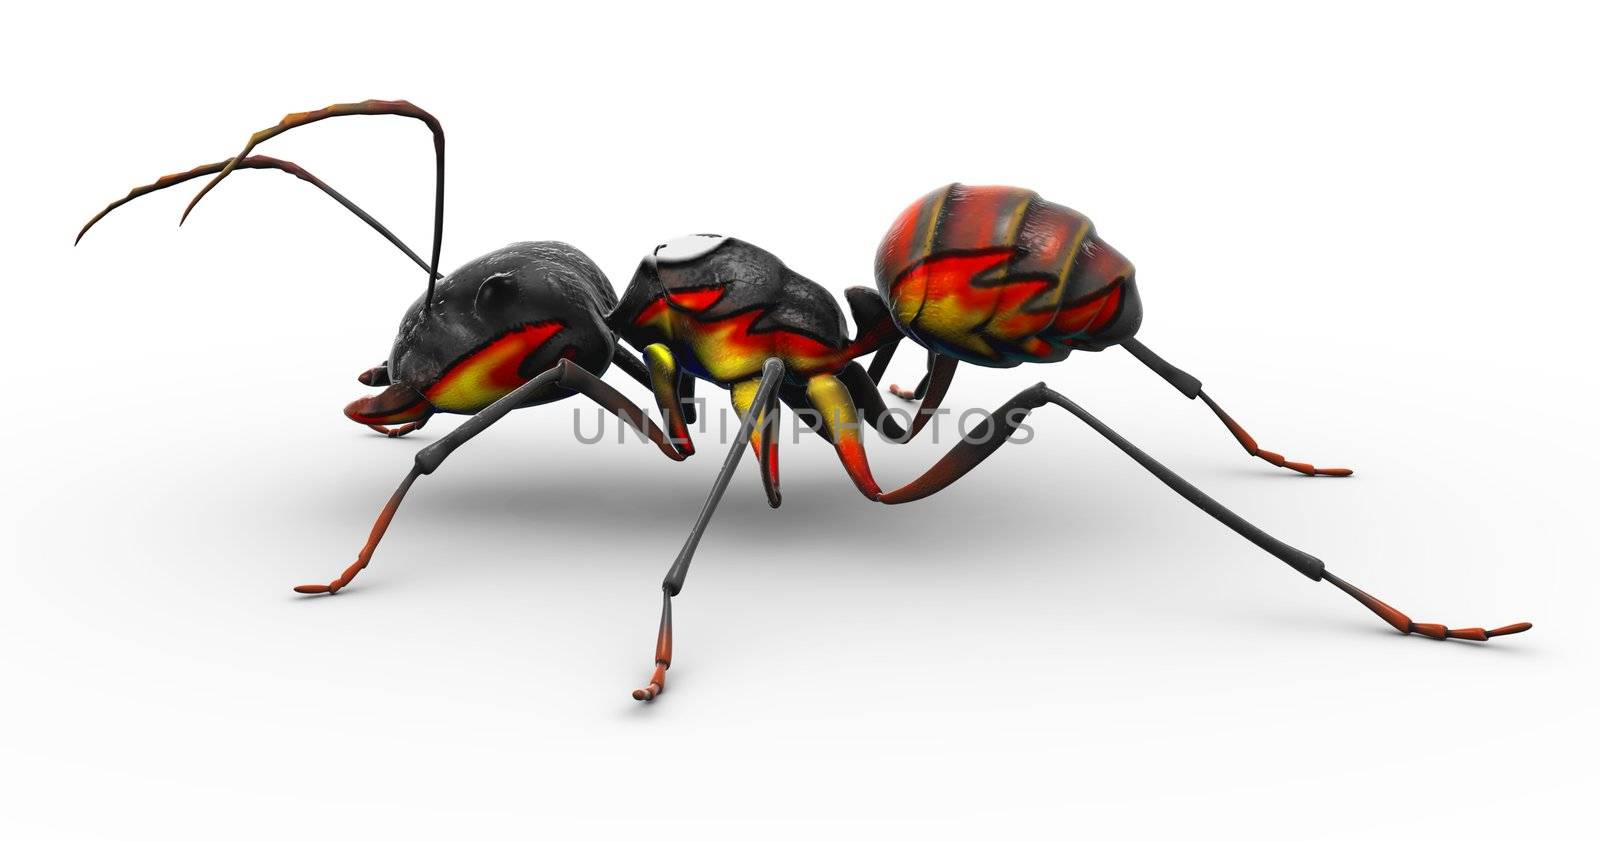 An ant with flames painted onto his body, making him resemble the familiar "fire ant"